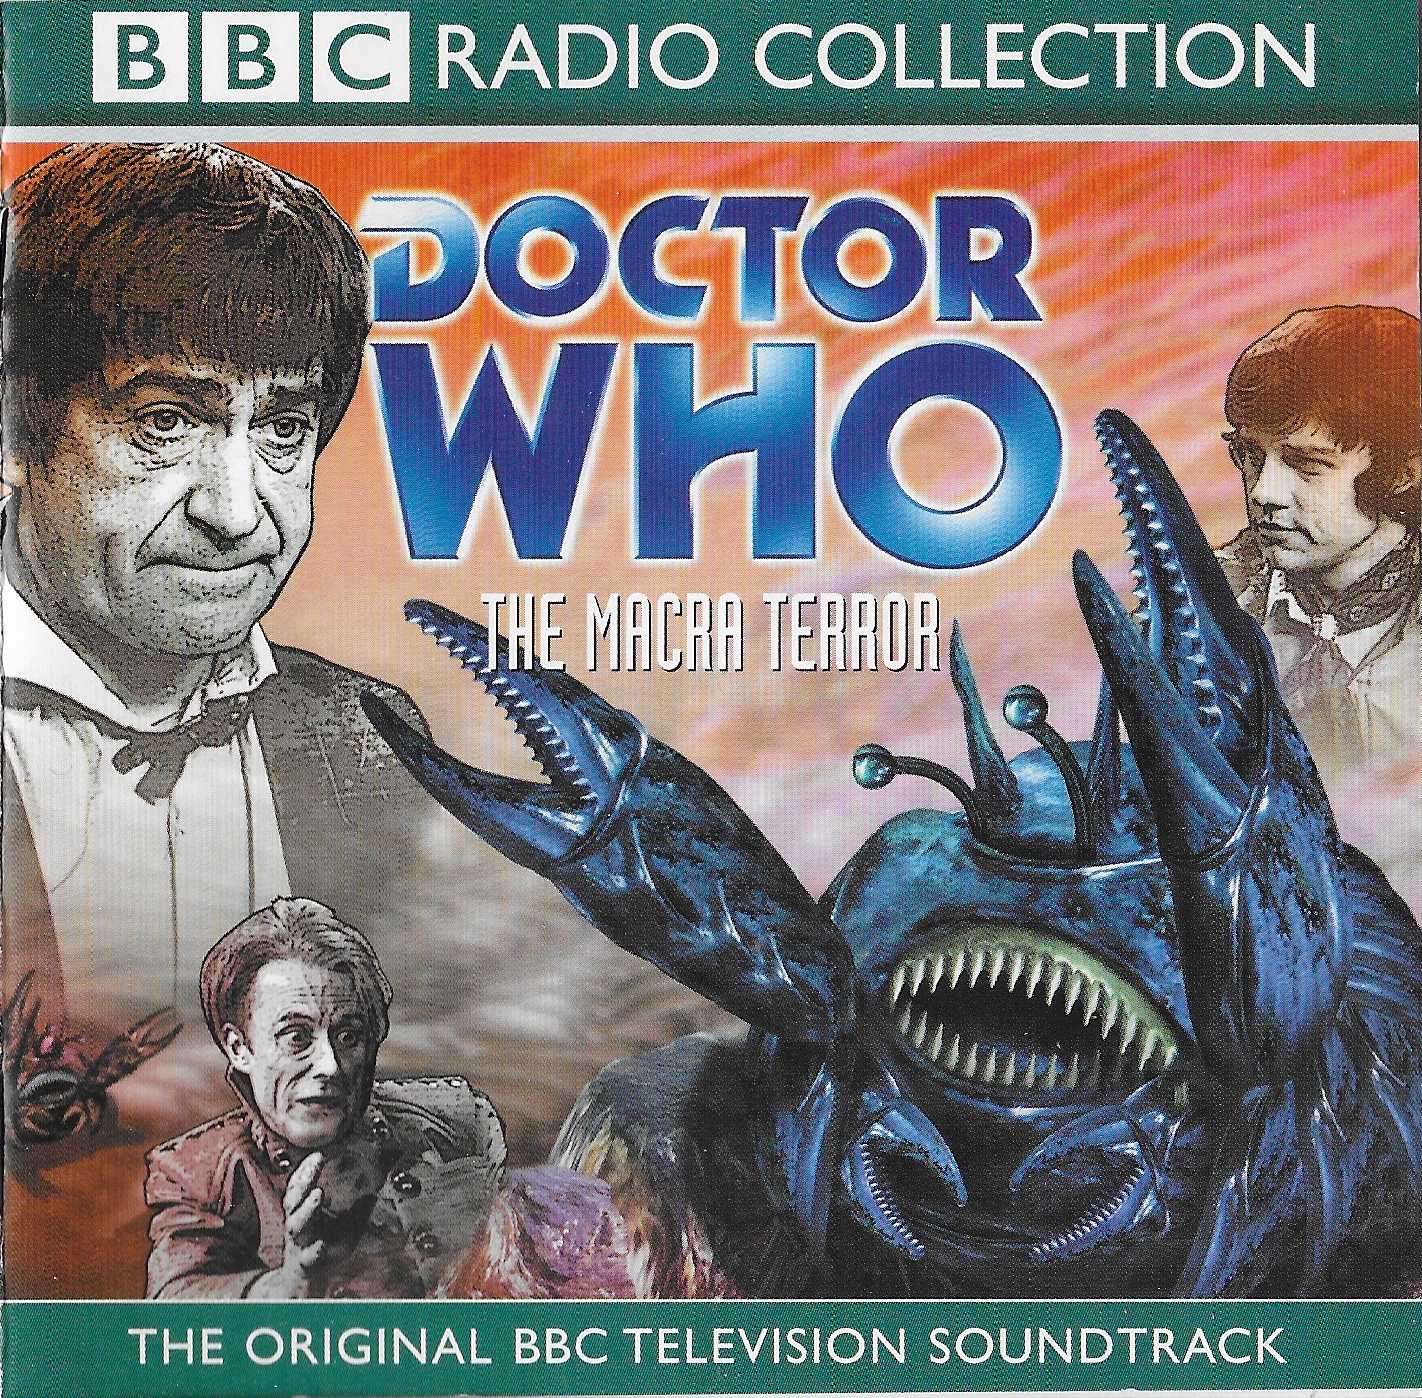 Picture of ISBN 0-563-47756-3 Doctor Who - The Macra terror by artist Ian Stuart Black from the BBC records and Tapes library